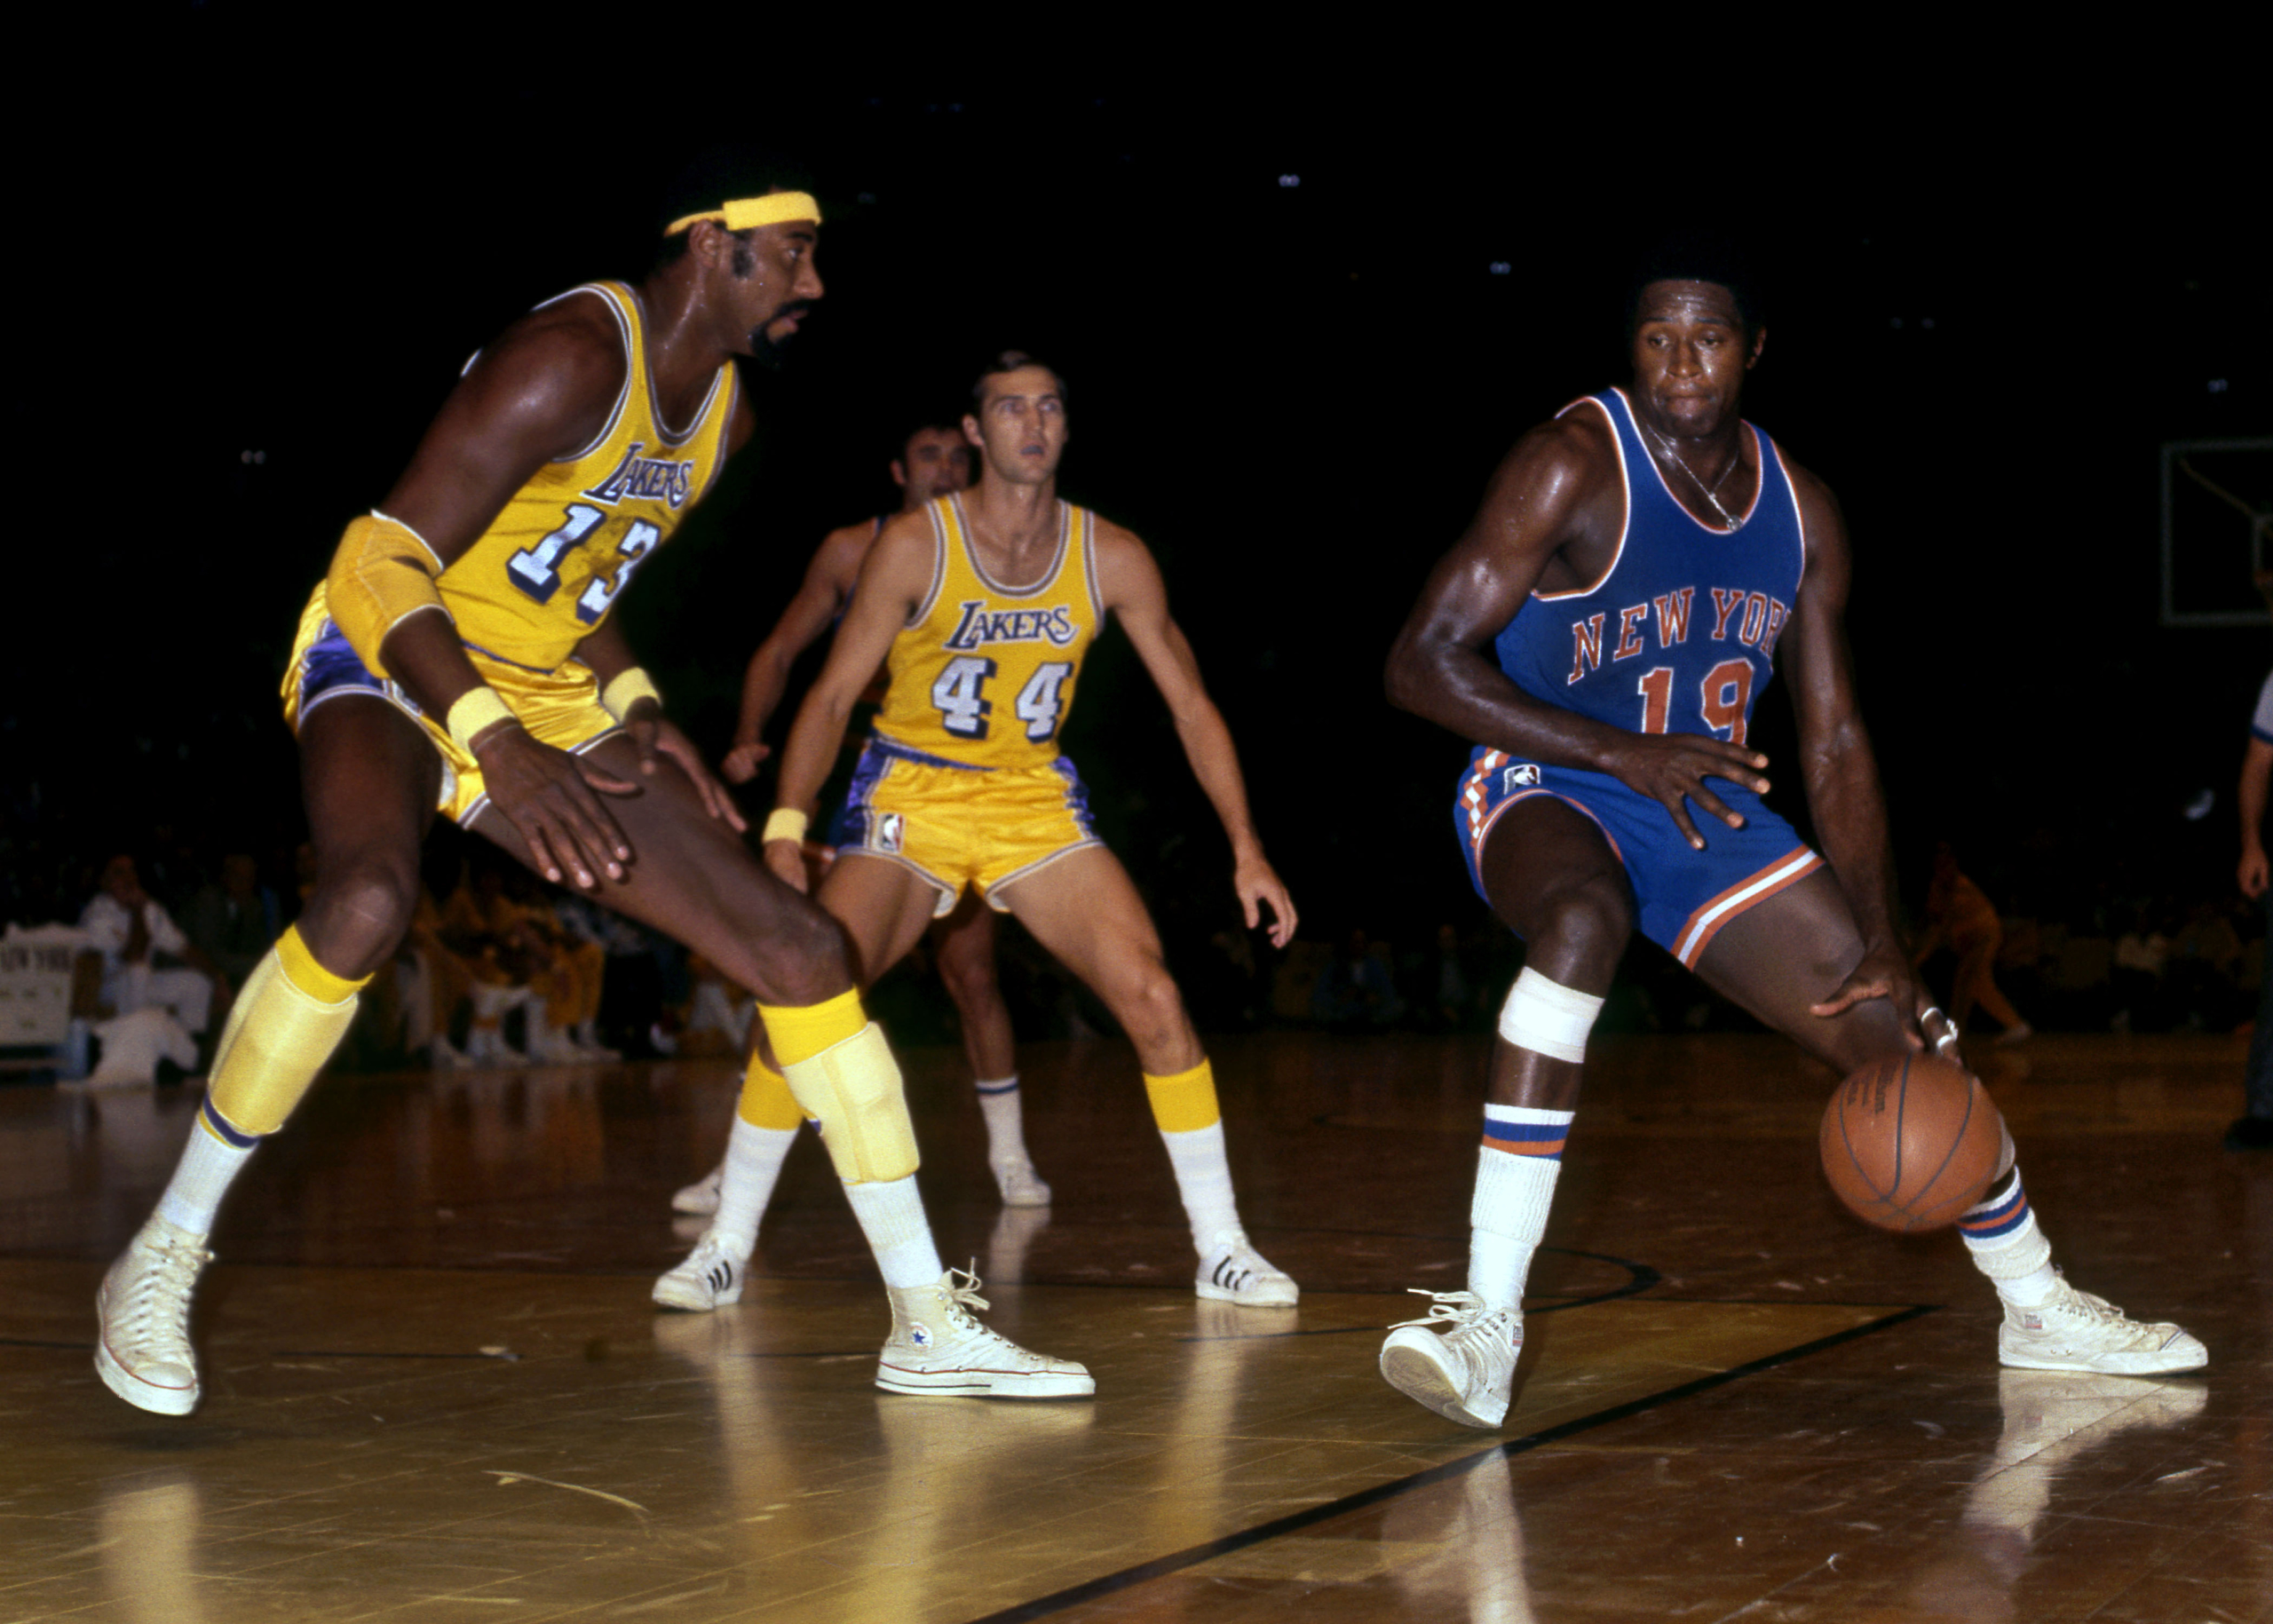 NBA Hall of Famer and Knicks Legend Willis Reed Dead at 80